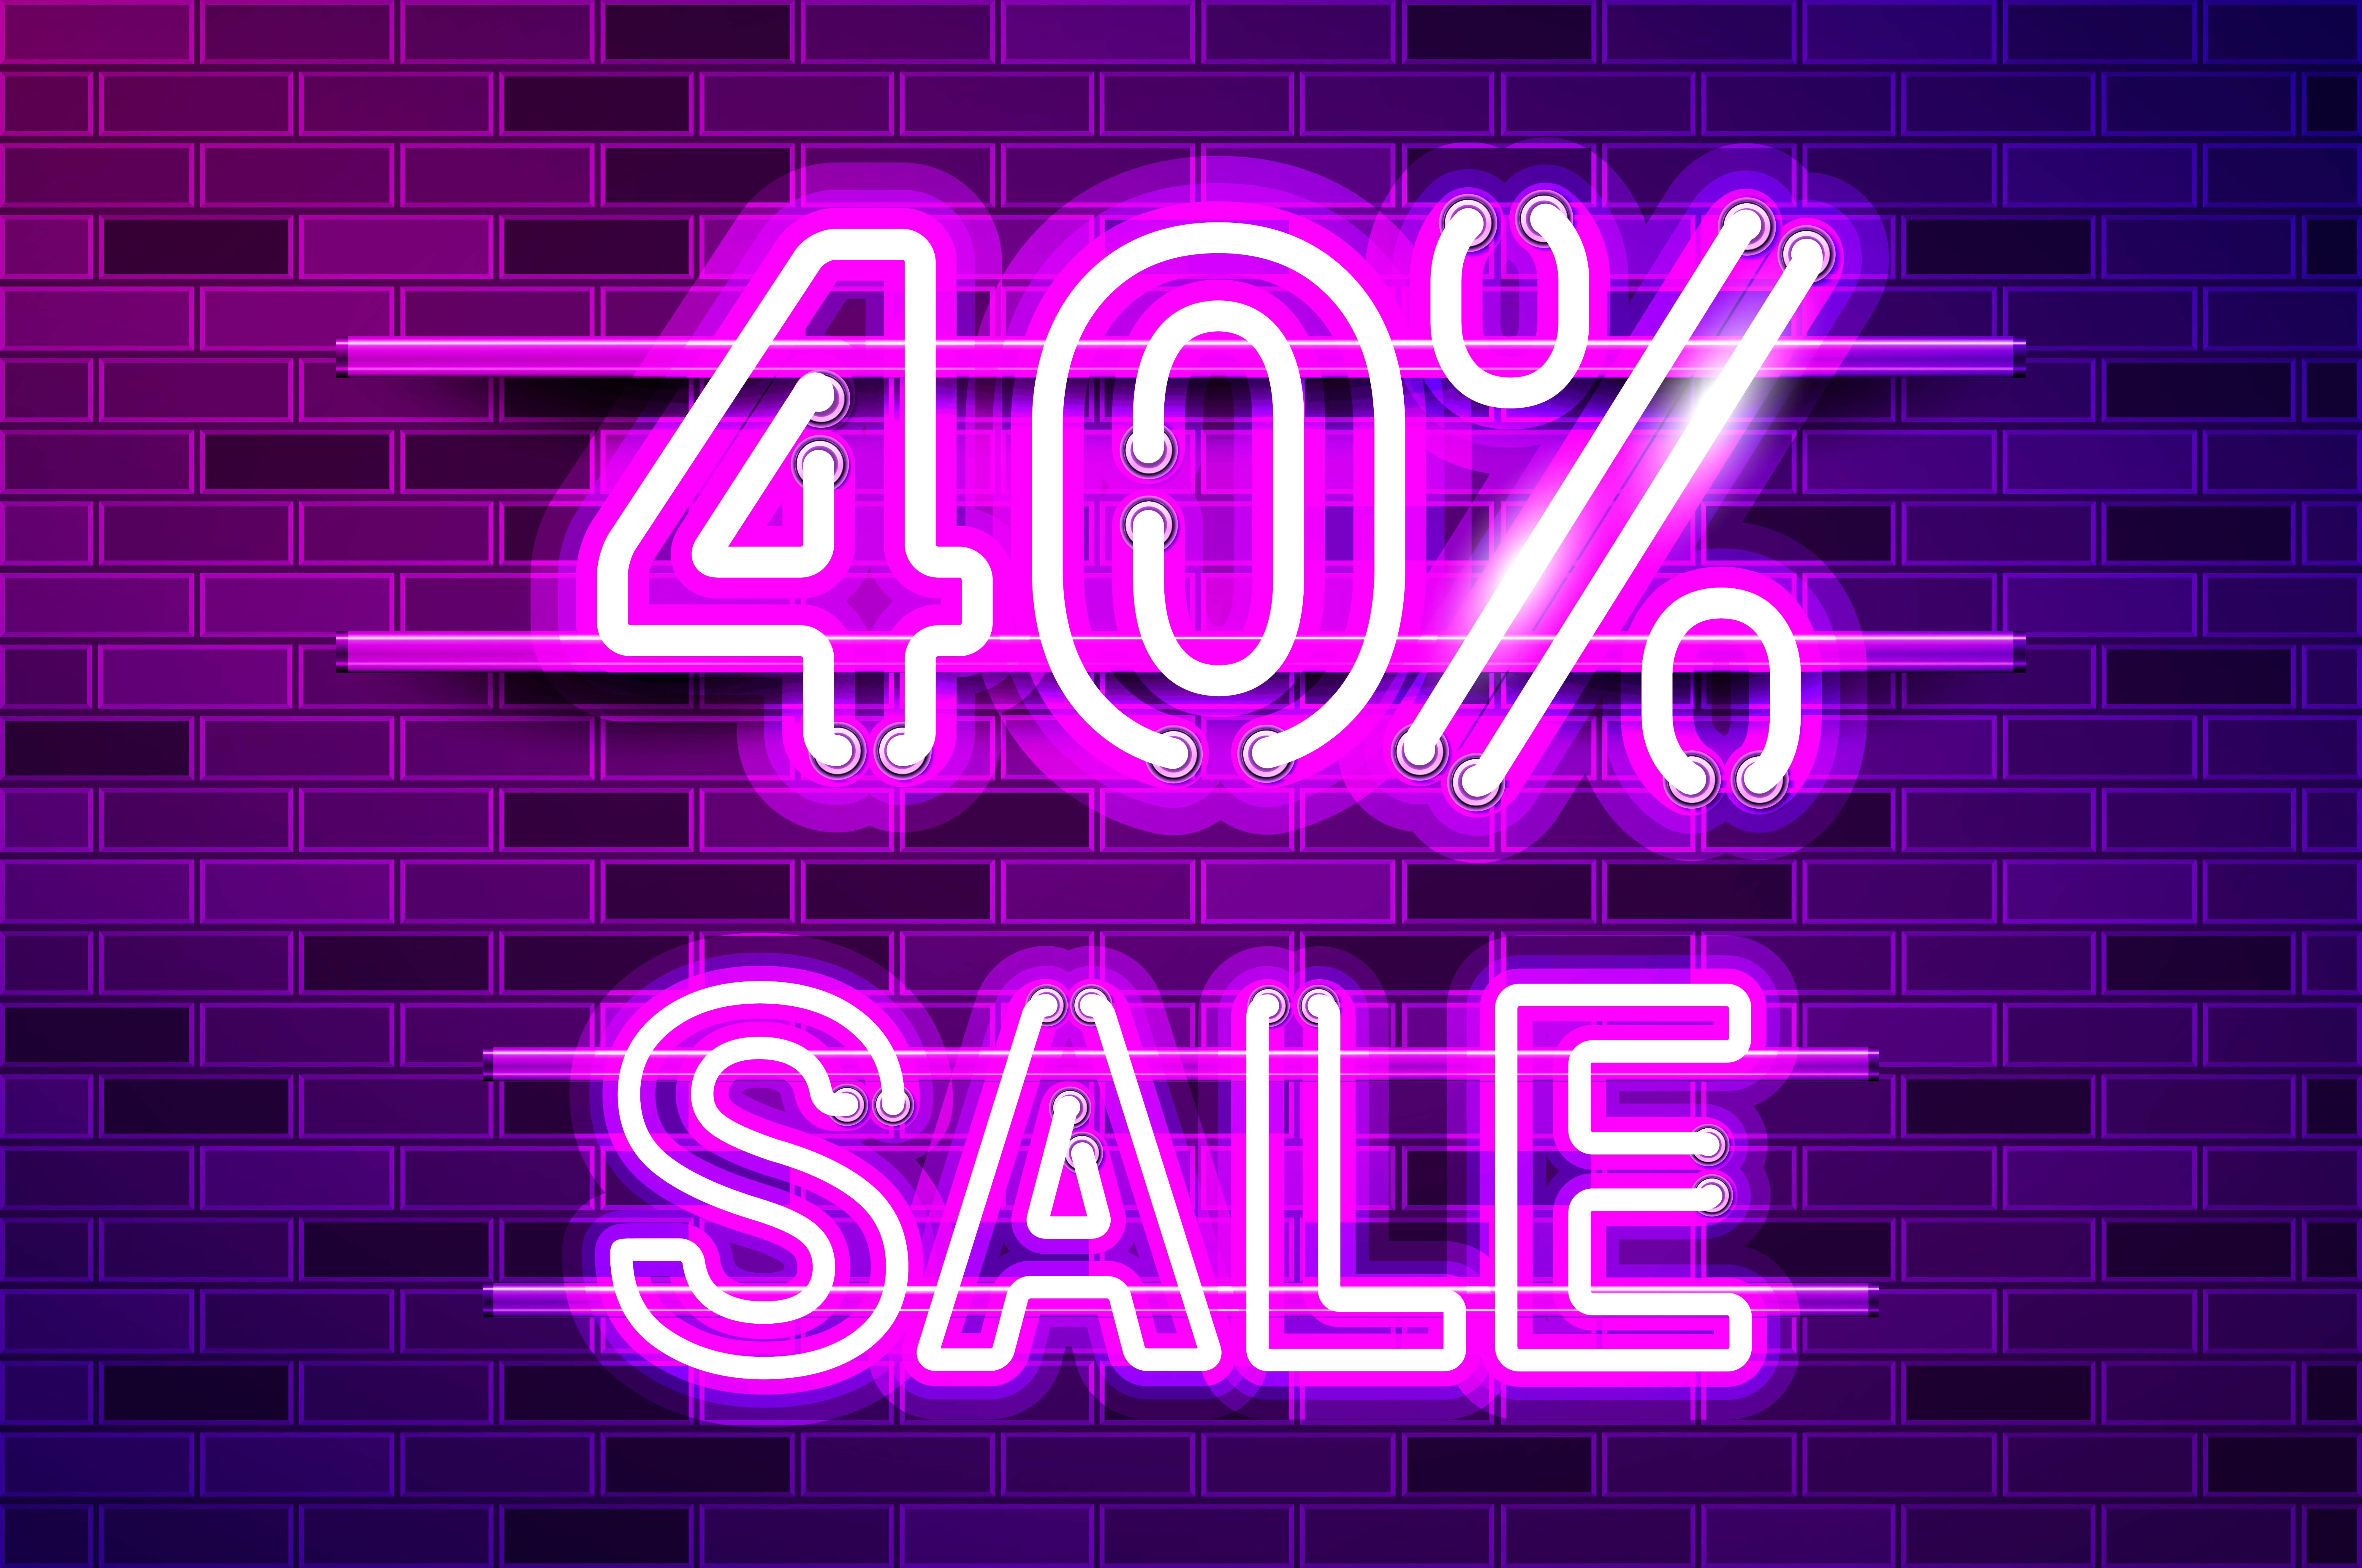 40 percent SALE glowing neon lamp sign. Realistic vector illustration. Purple brick wall, violet glow, metal holders.. 40 percent SALE glowing purple neon lamp sign